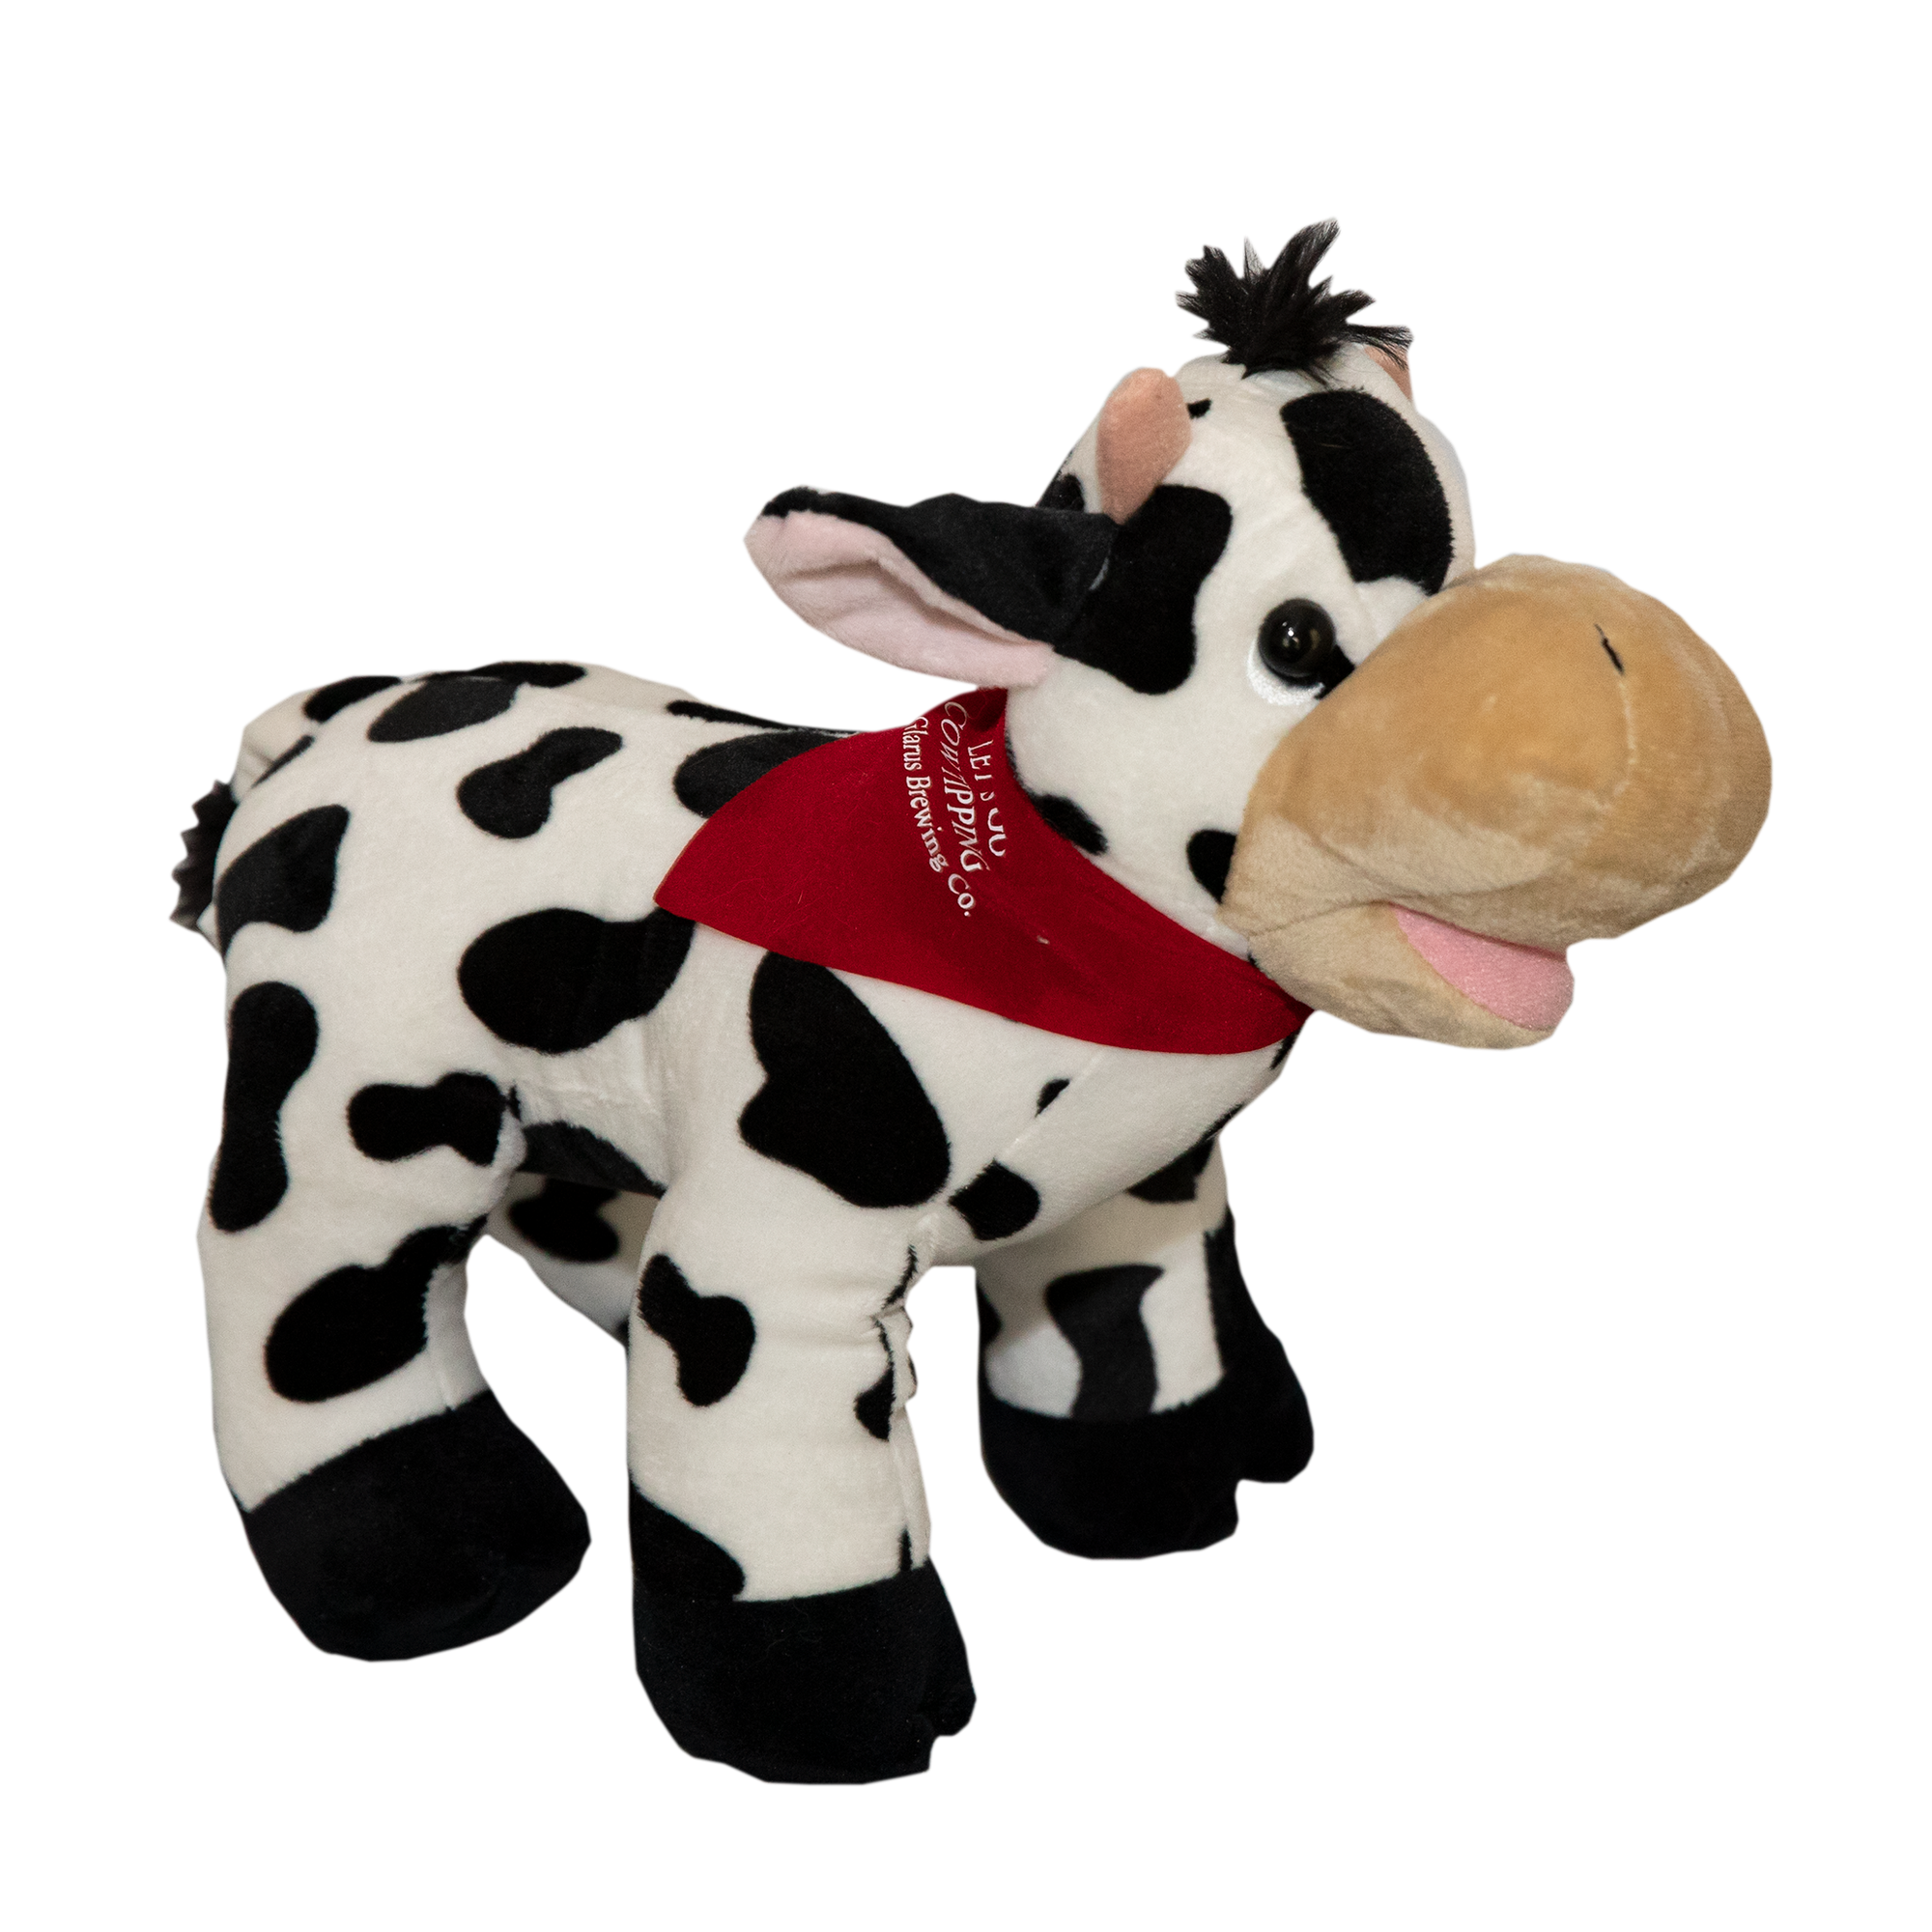 Plush stuffed black and white spotted cow toy with a red bandana.